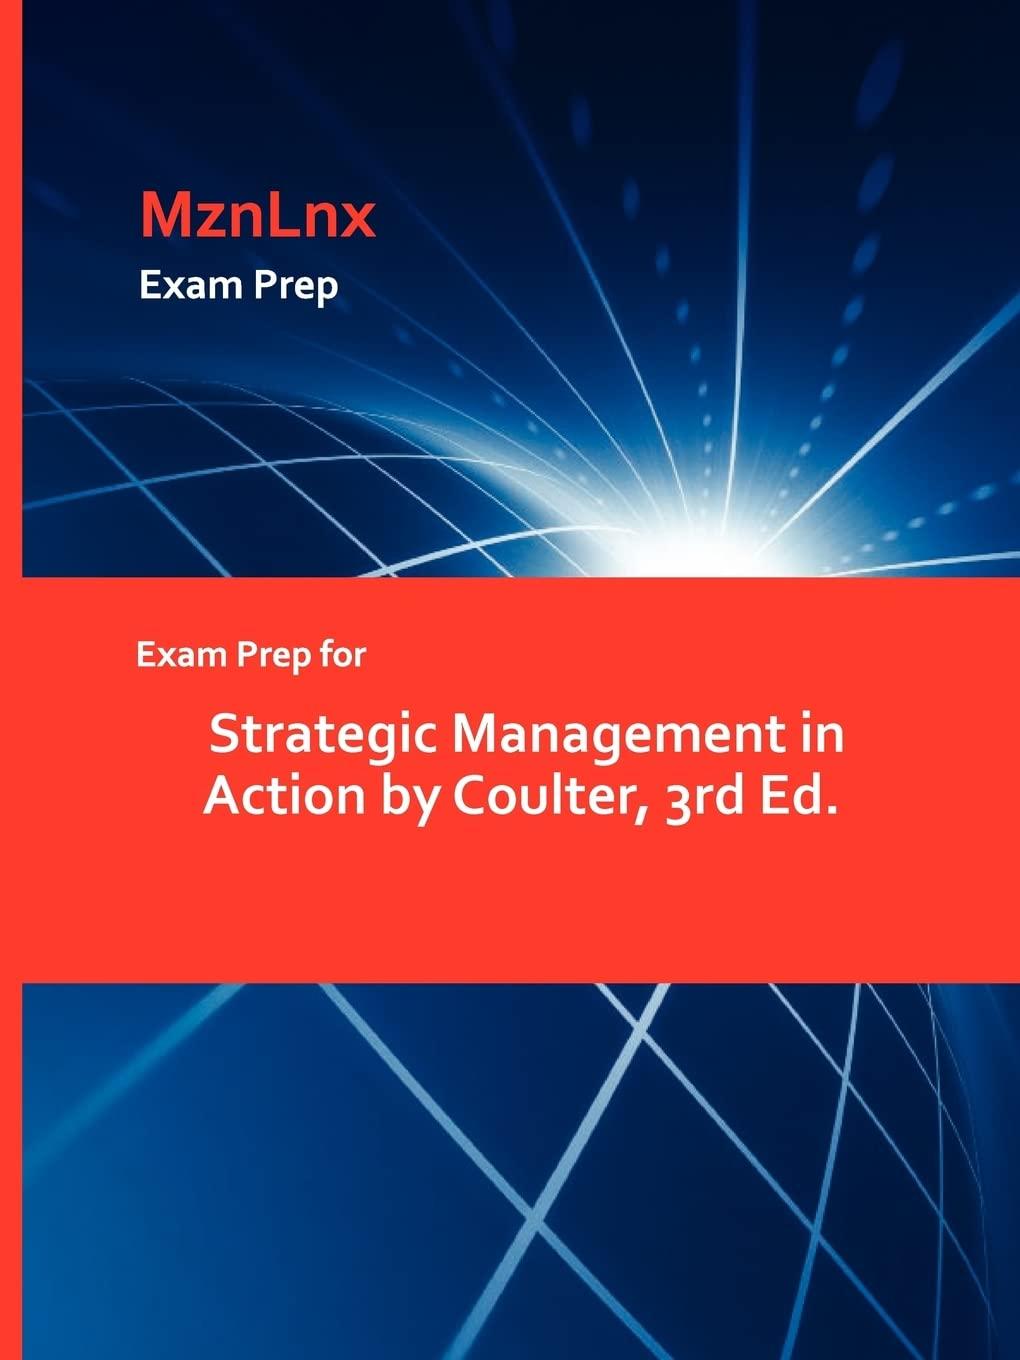 Exam Prep For Strategic Management In Action By Coulter